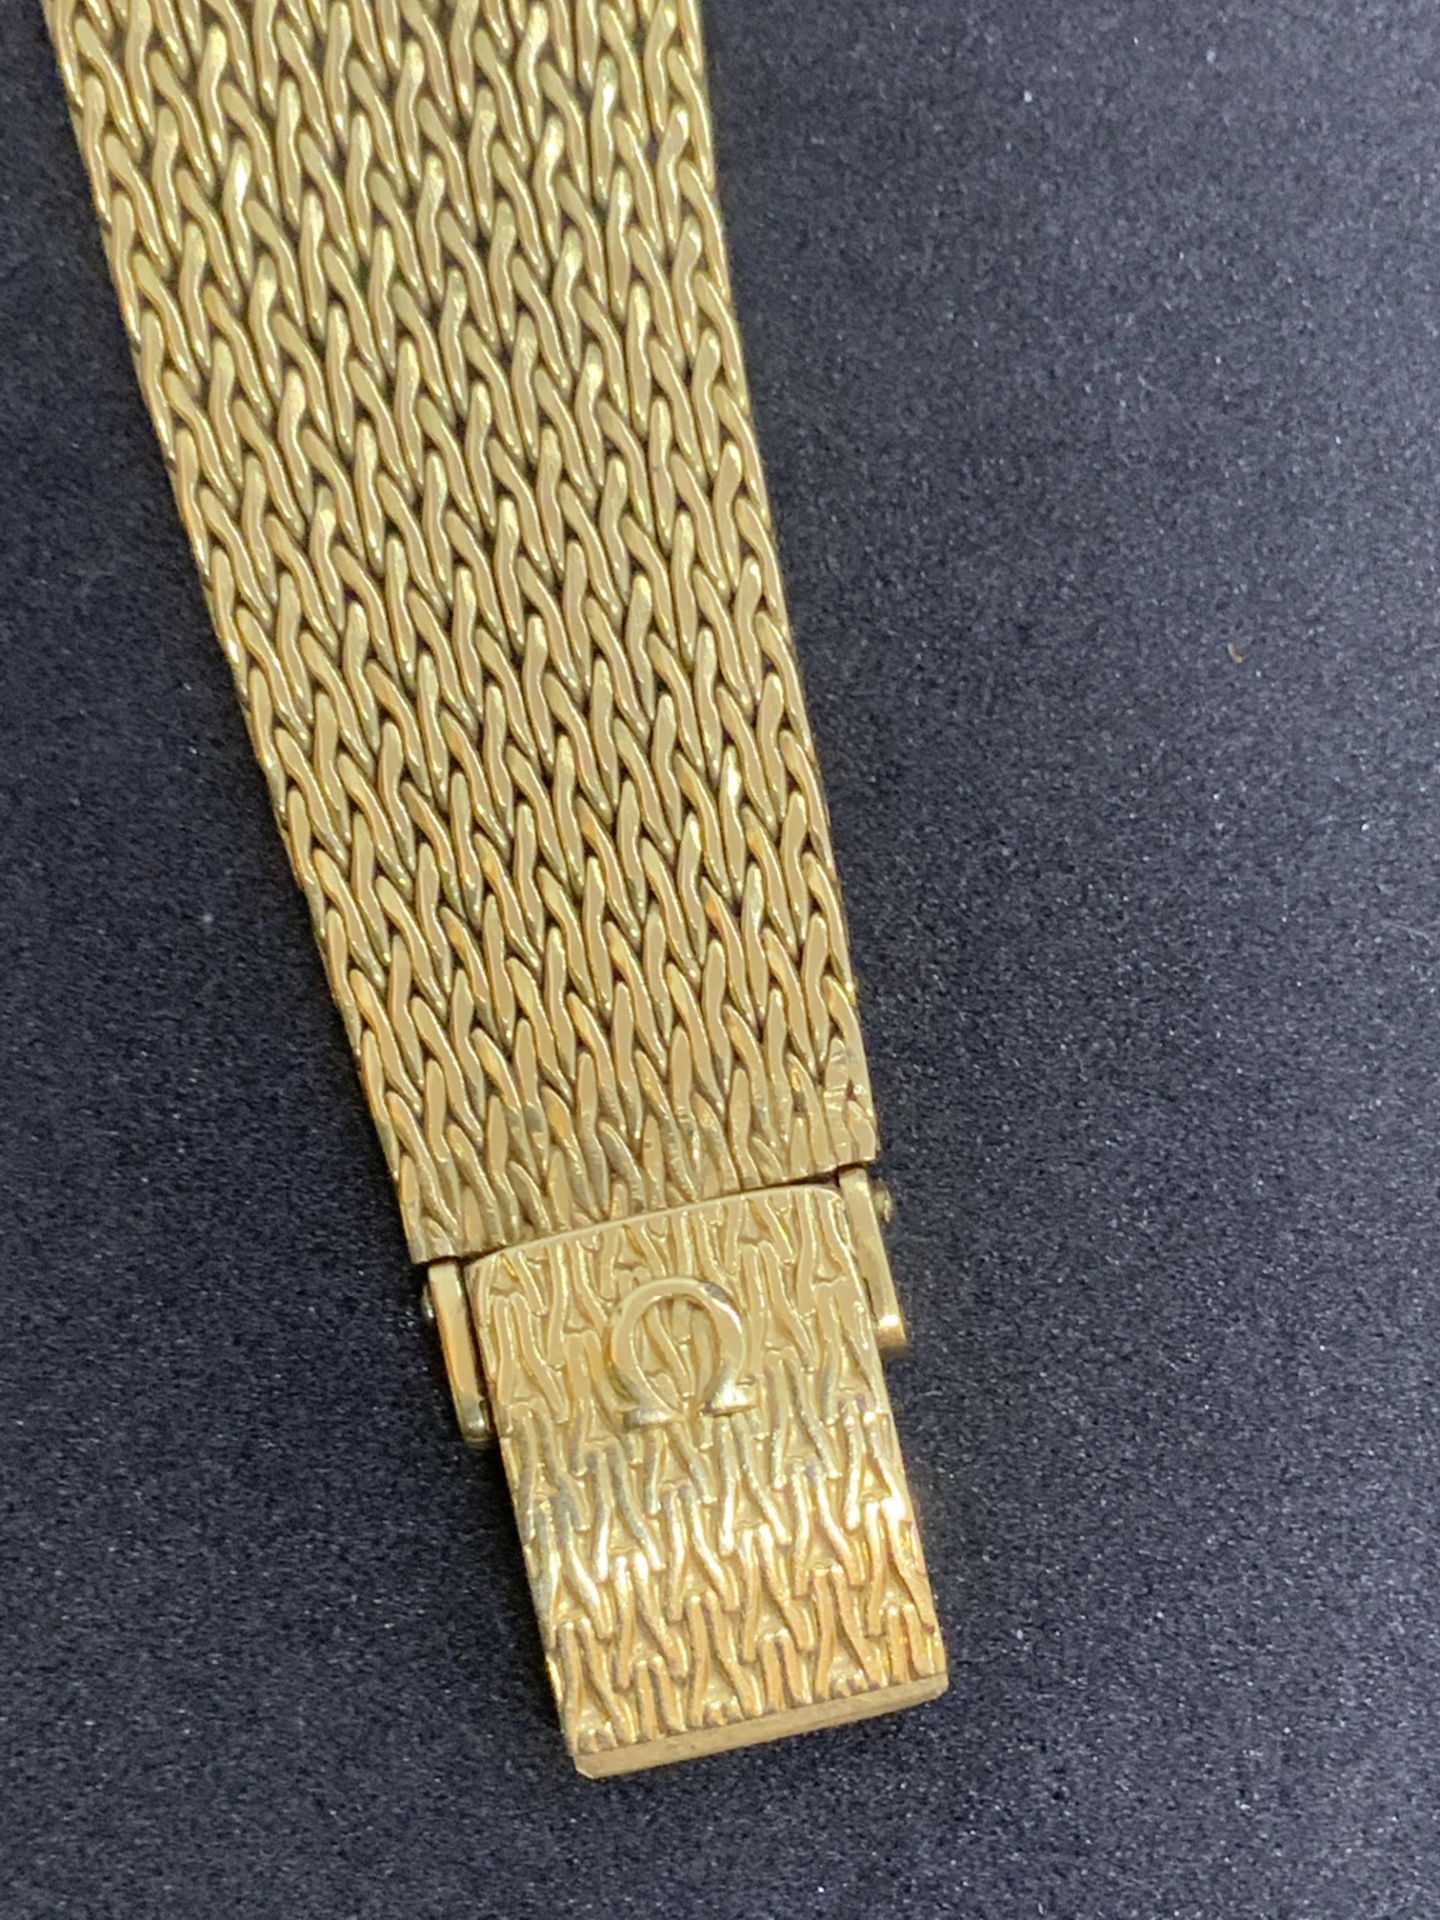 18ct GOLD OMEGA DE VILLE AUTOMATIC WATCH - 99 GRAMS - Image 5 of 8